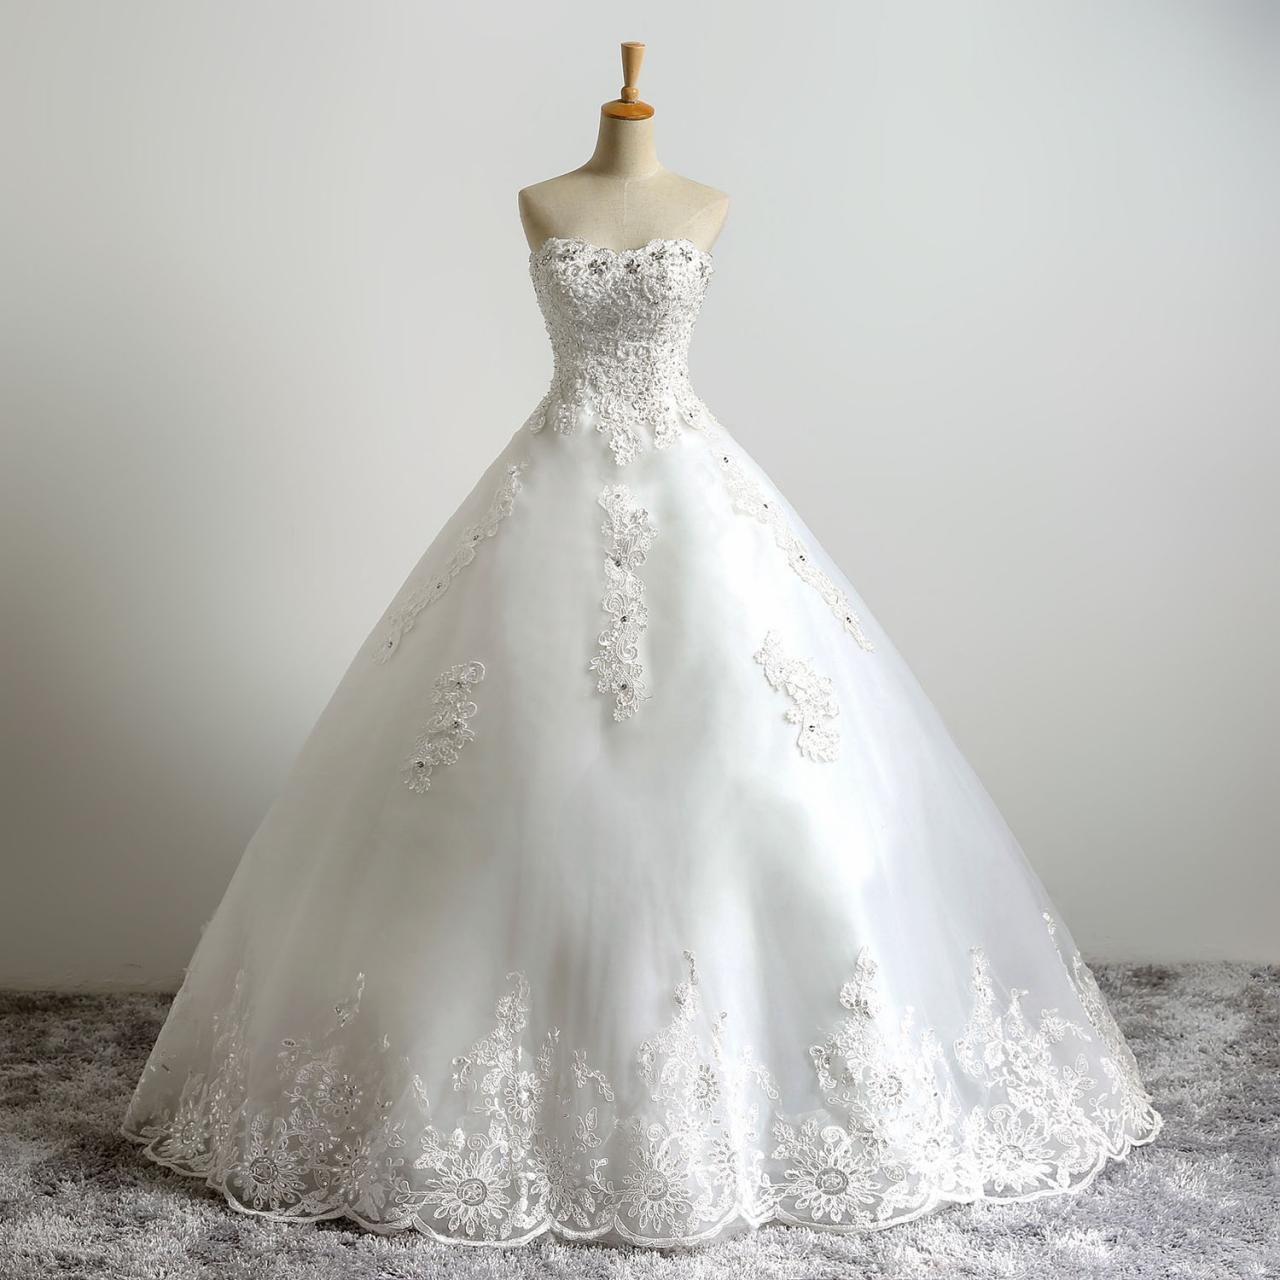 Ivory Floor Length Lace Tulle Wedding Gown Featuring Lace Appliqués And Rhinestones Embellished Sweetheart Bodice